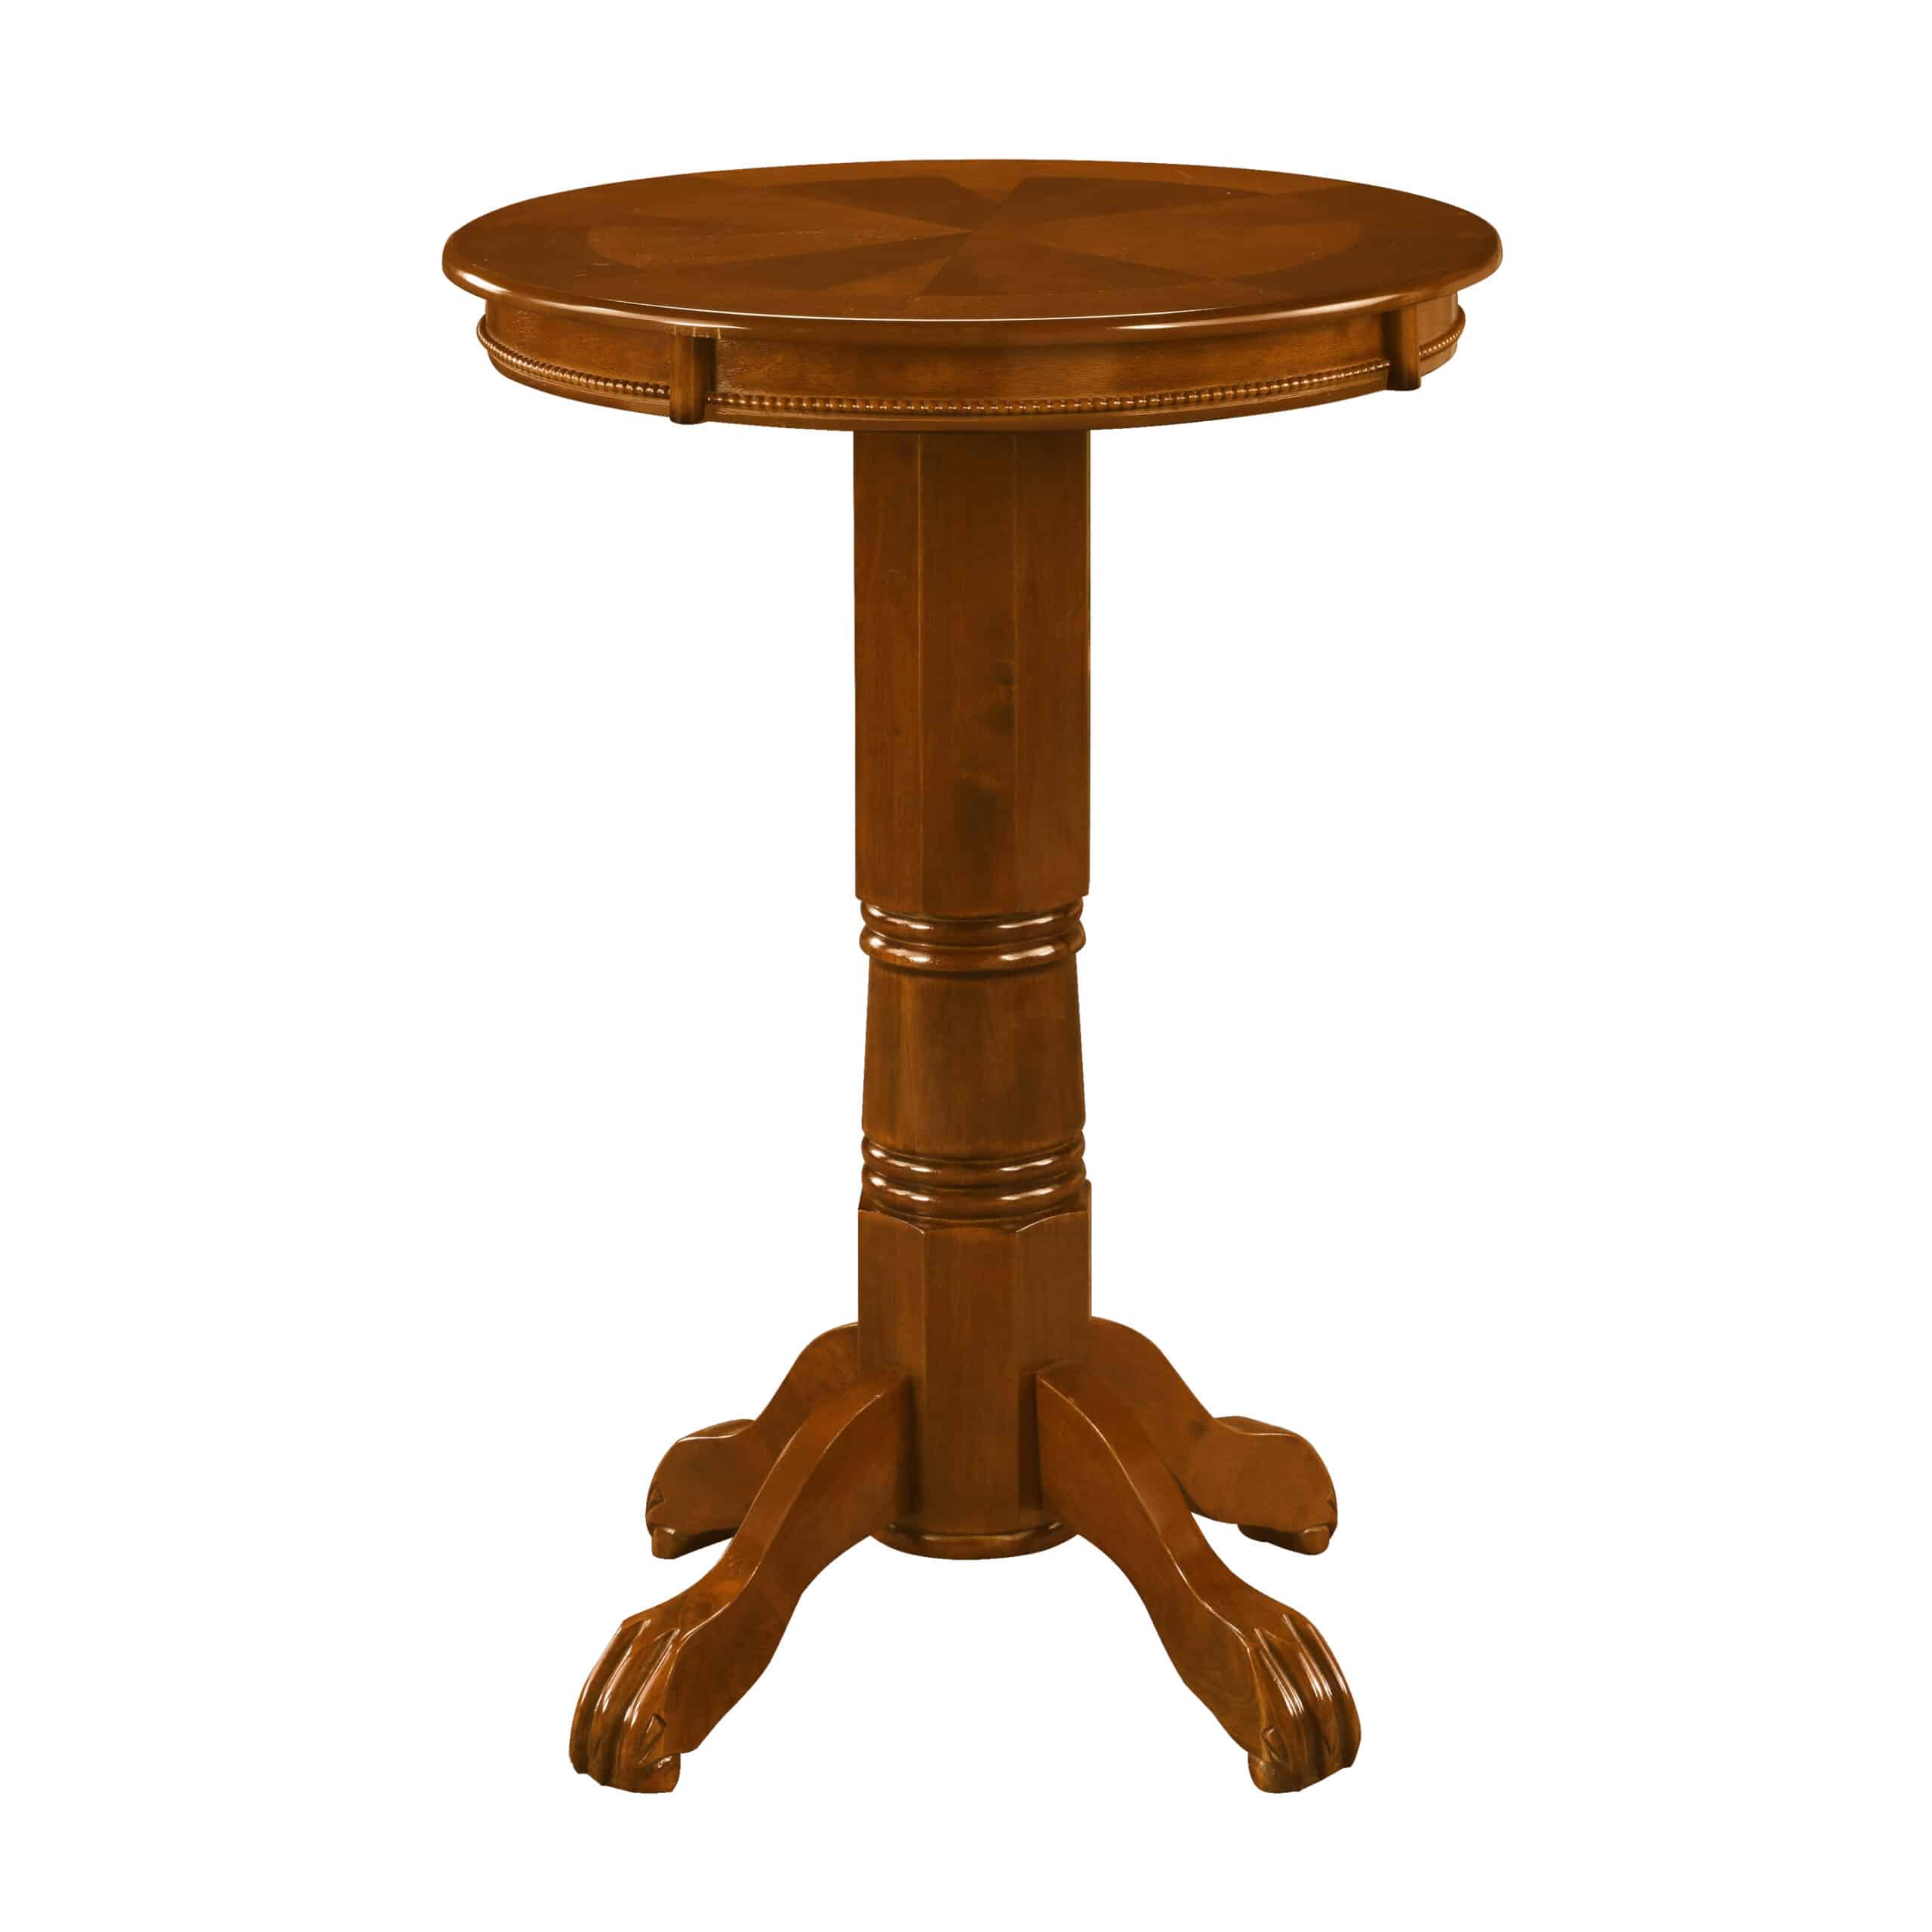 Boraam Florence 42in. Height Round Wood Pub Table - Cherry Finish - image 2 of 6